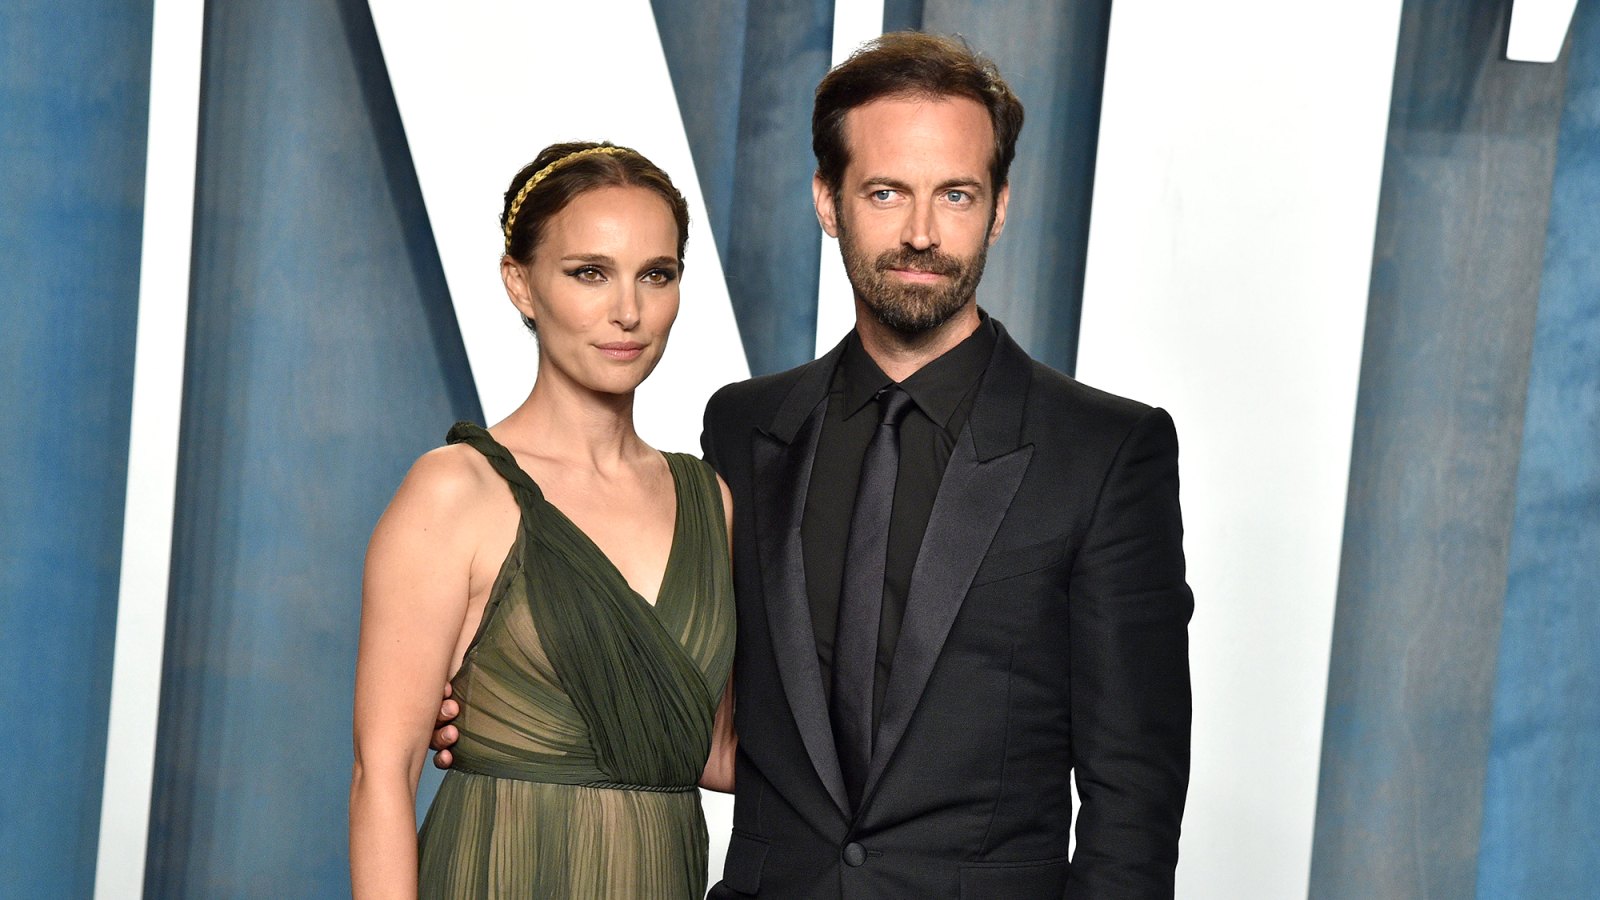 Natalie Portman and Benjamin Millepied Finalize Divorce After 11 Years of Marriage